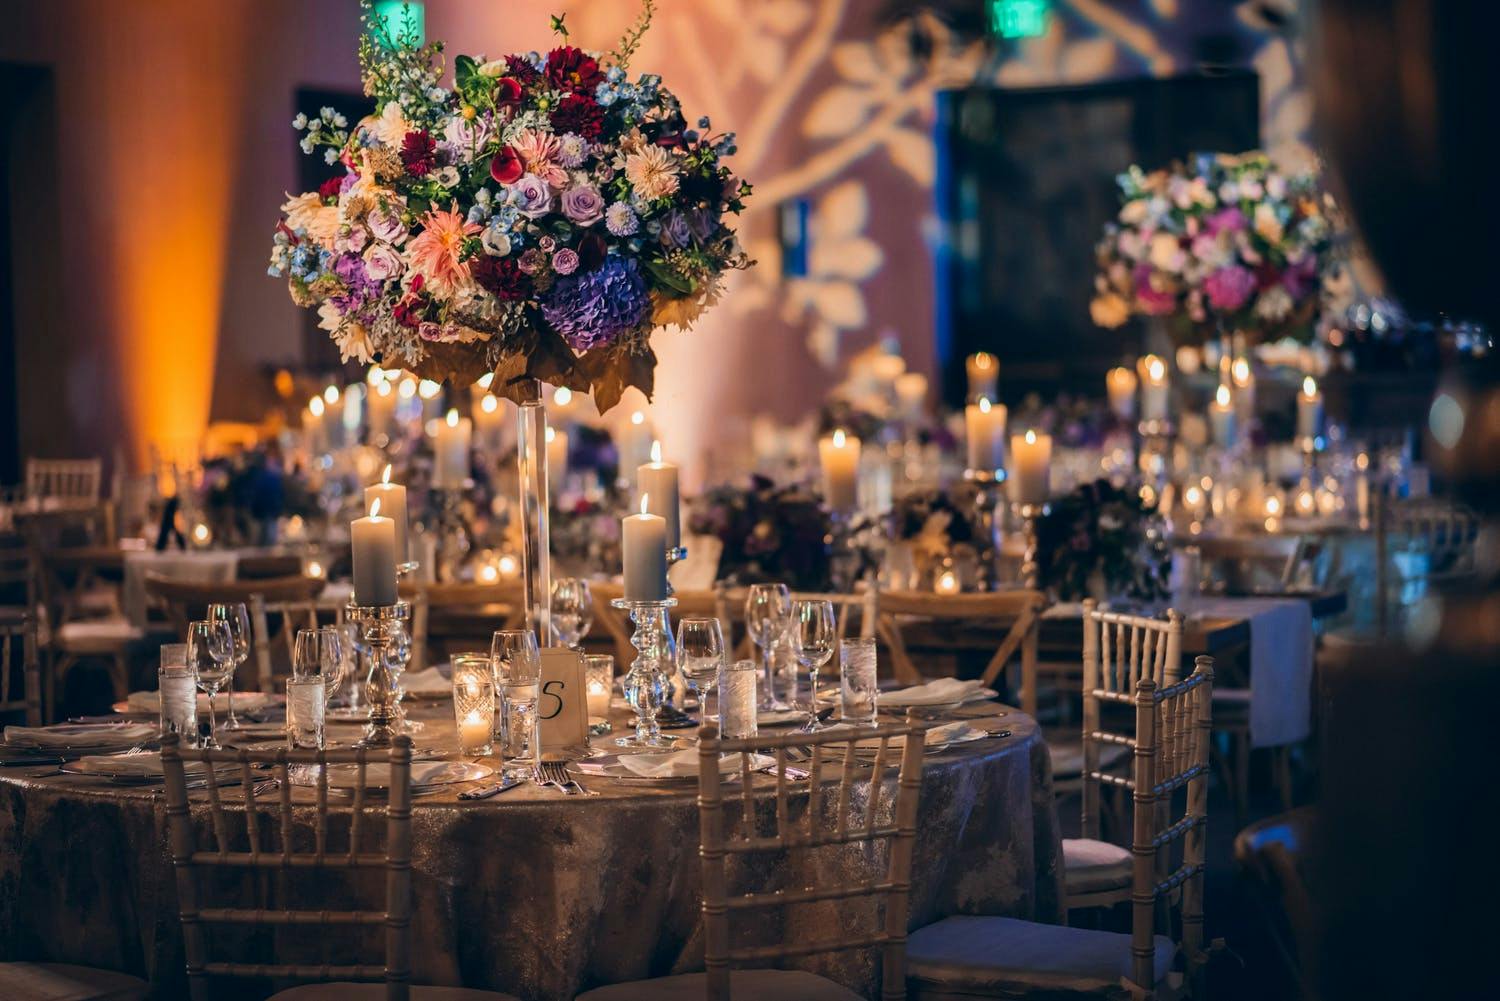 Tall Wedding Floral Centerpiece With Floral Lighting Projection in Backdrop | PartySlate